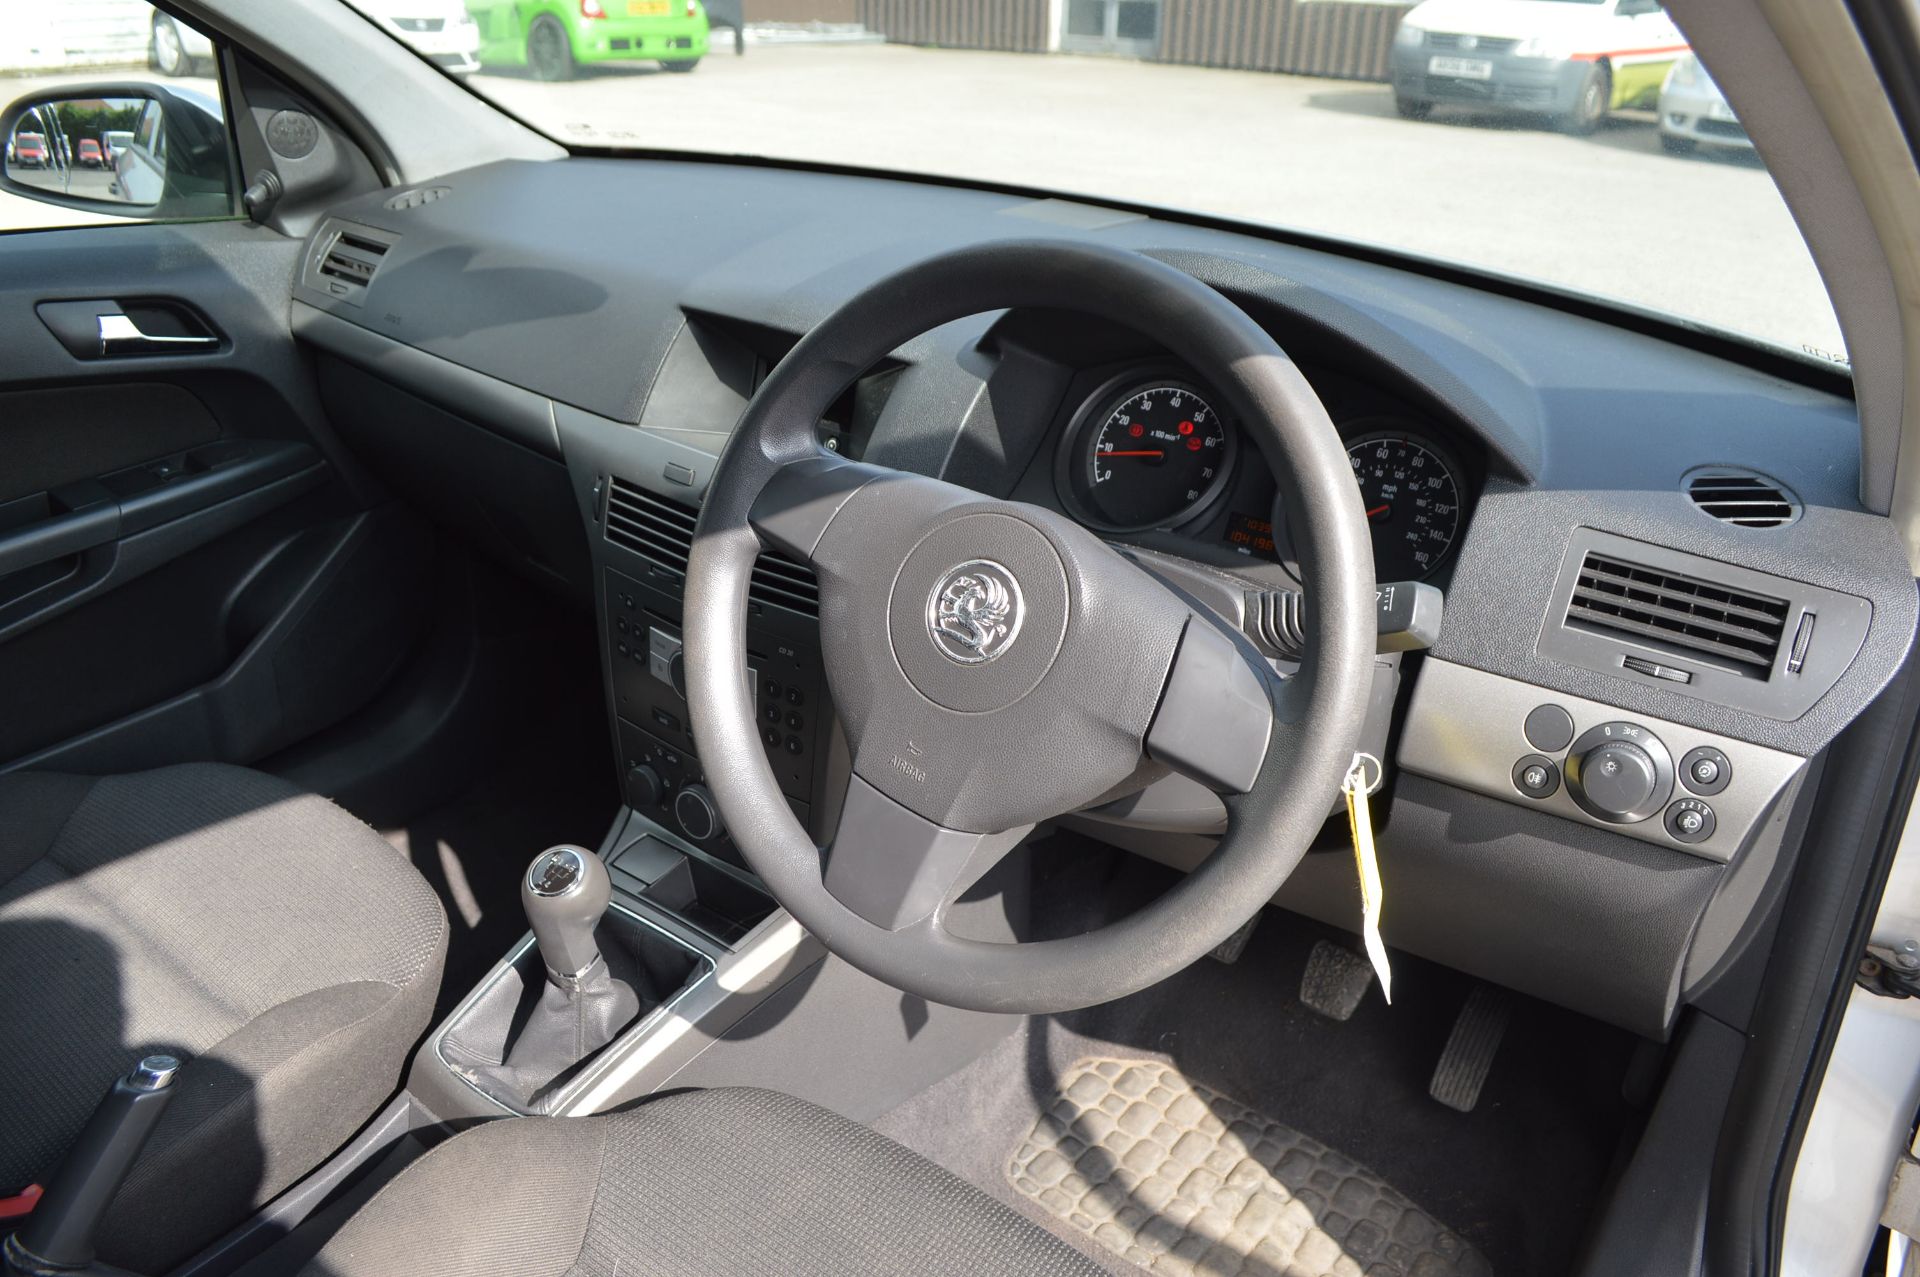 2005/54 REG VAUXHALL ASTRA LIFE TWINPORT, AIR CONDITIONING *NO VAT* - Image 22 of 26